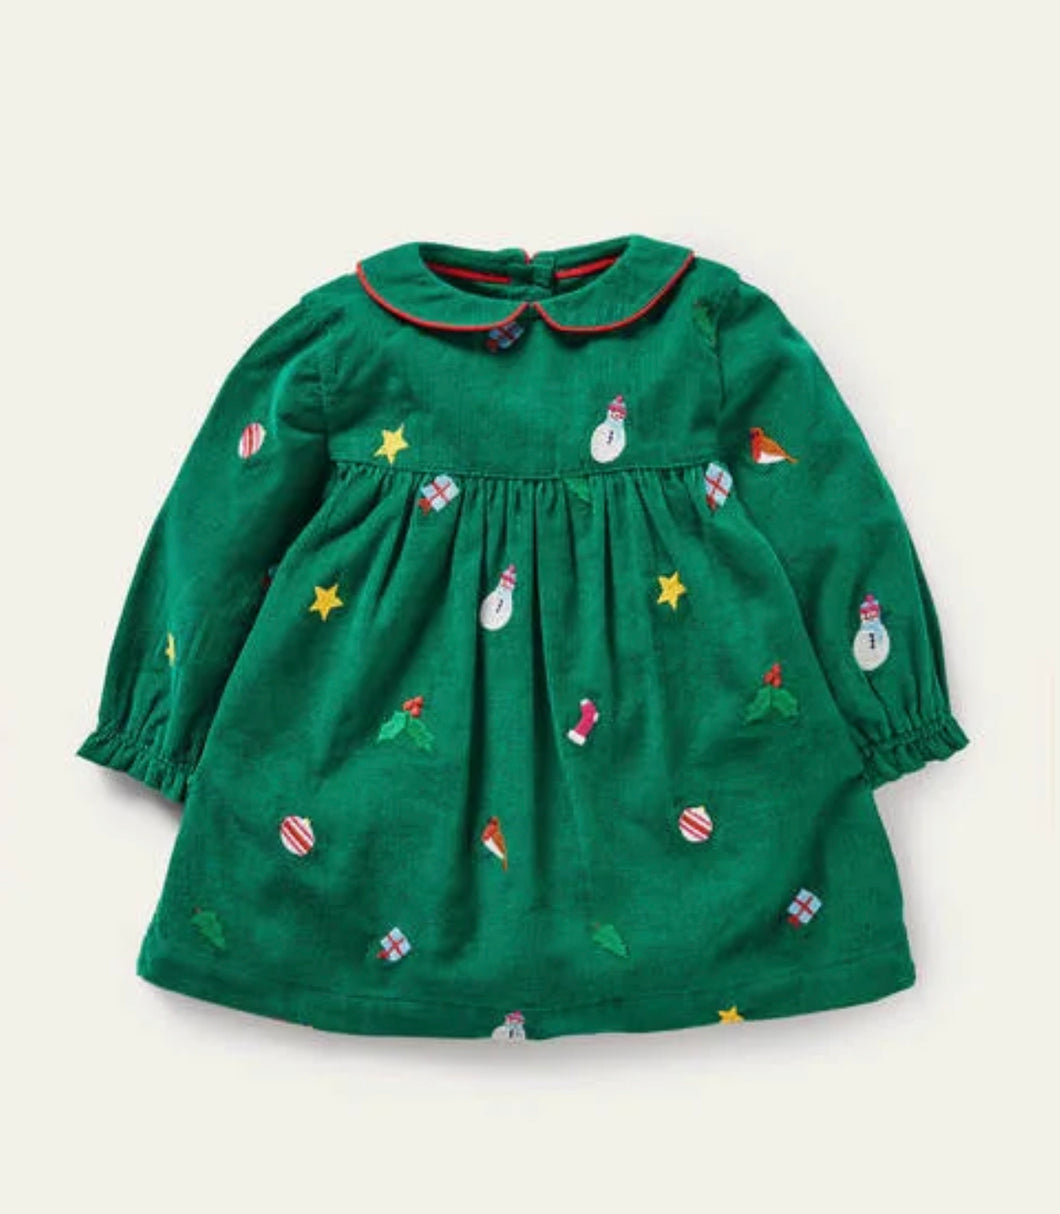 NWT Baby Boden Festive Embroidered Dress